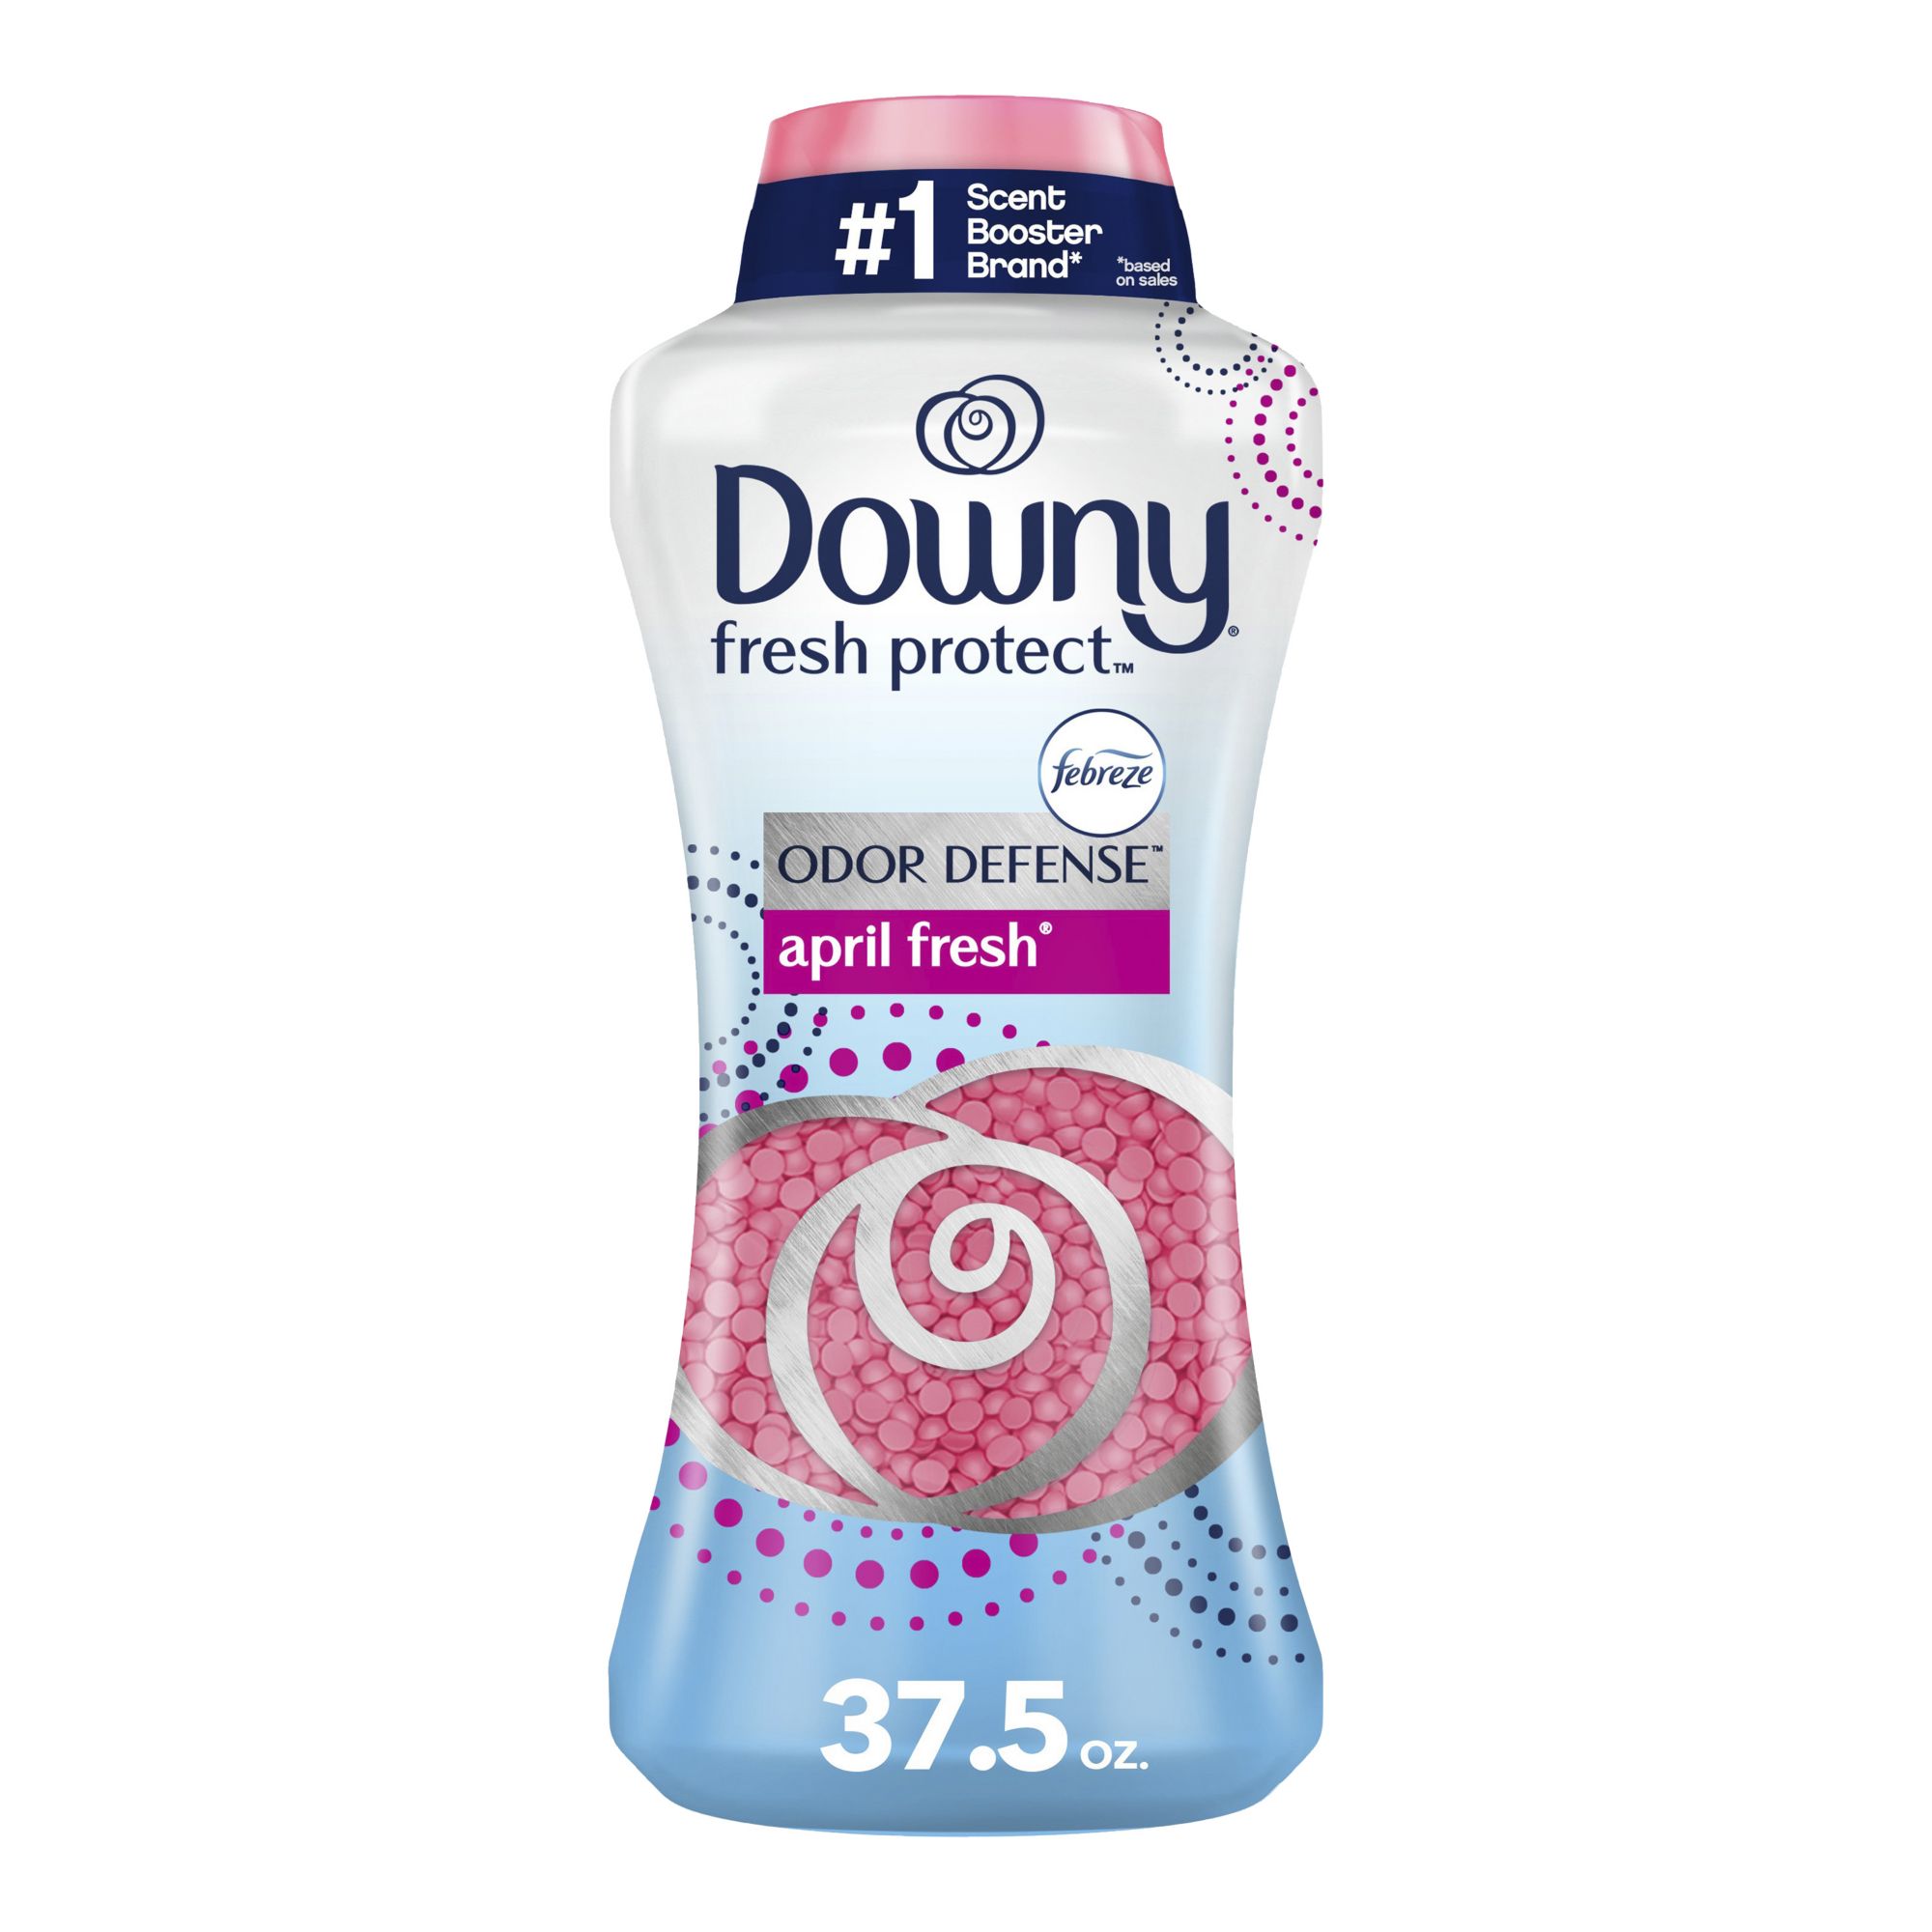 Downy April Fresh Ultra Concentrated Liquid Fabric Conditioner 170 Oz., Detergents & Softeners, Household